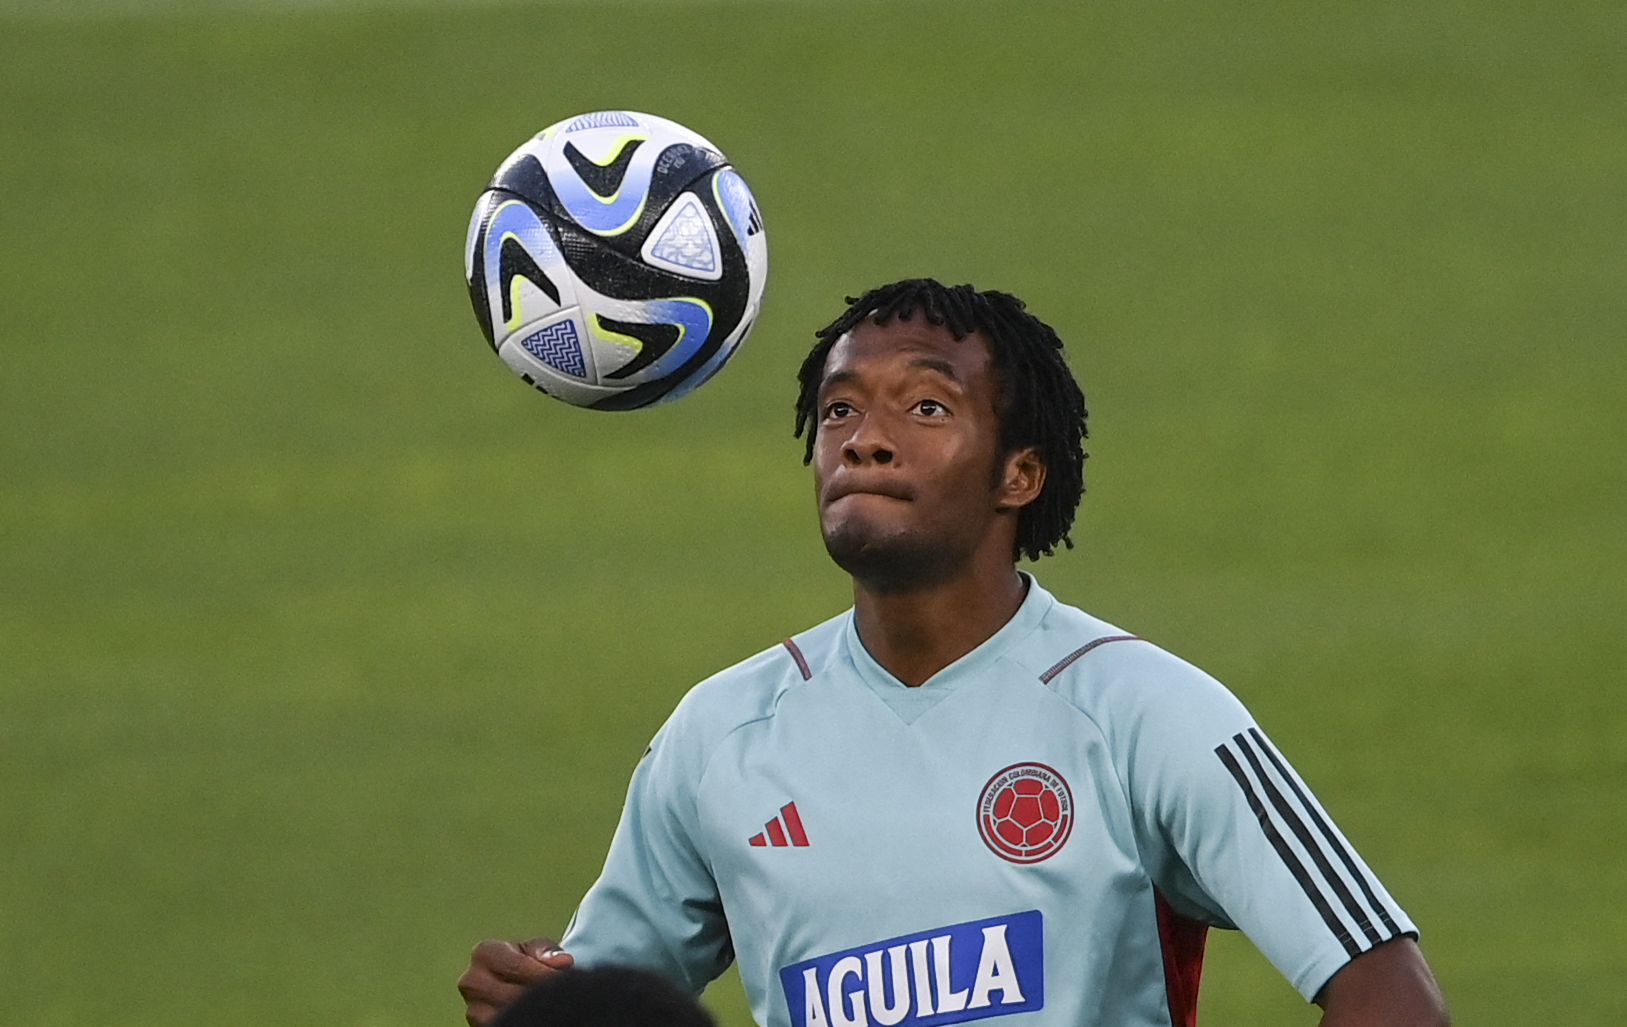 Colombia's midfielder Juan Guillermo Cuadrado eyes the ball during a training session at the Metropolitano Roberto Melendez stadium in Barranquilla, Colombia, on September 6, 2023, on the eve of their 2026 FIFA World Cup Qualifier football match against Venezuela. (Photo by Juan BARRETO / AFP)